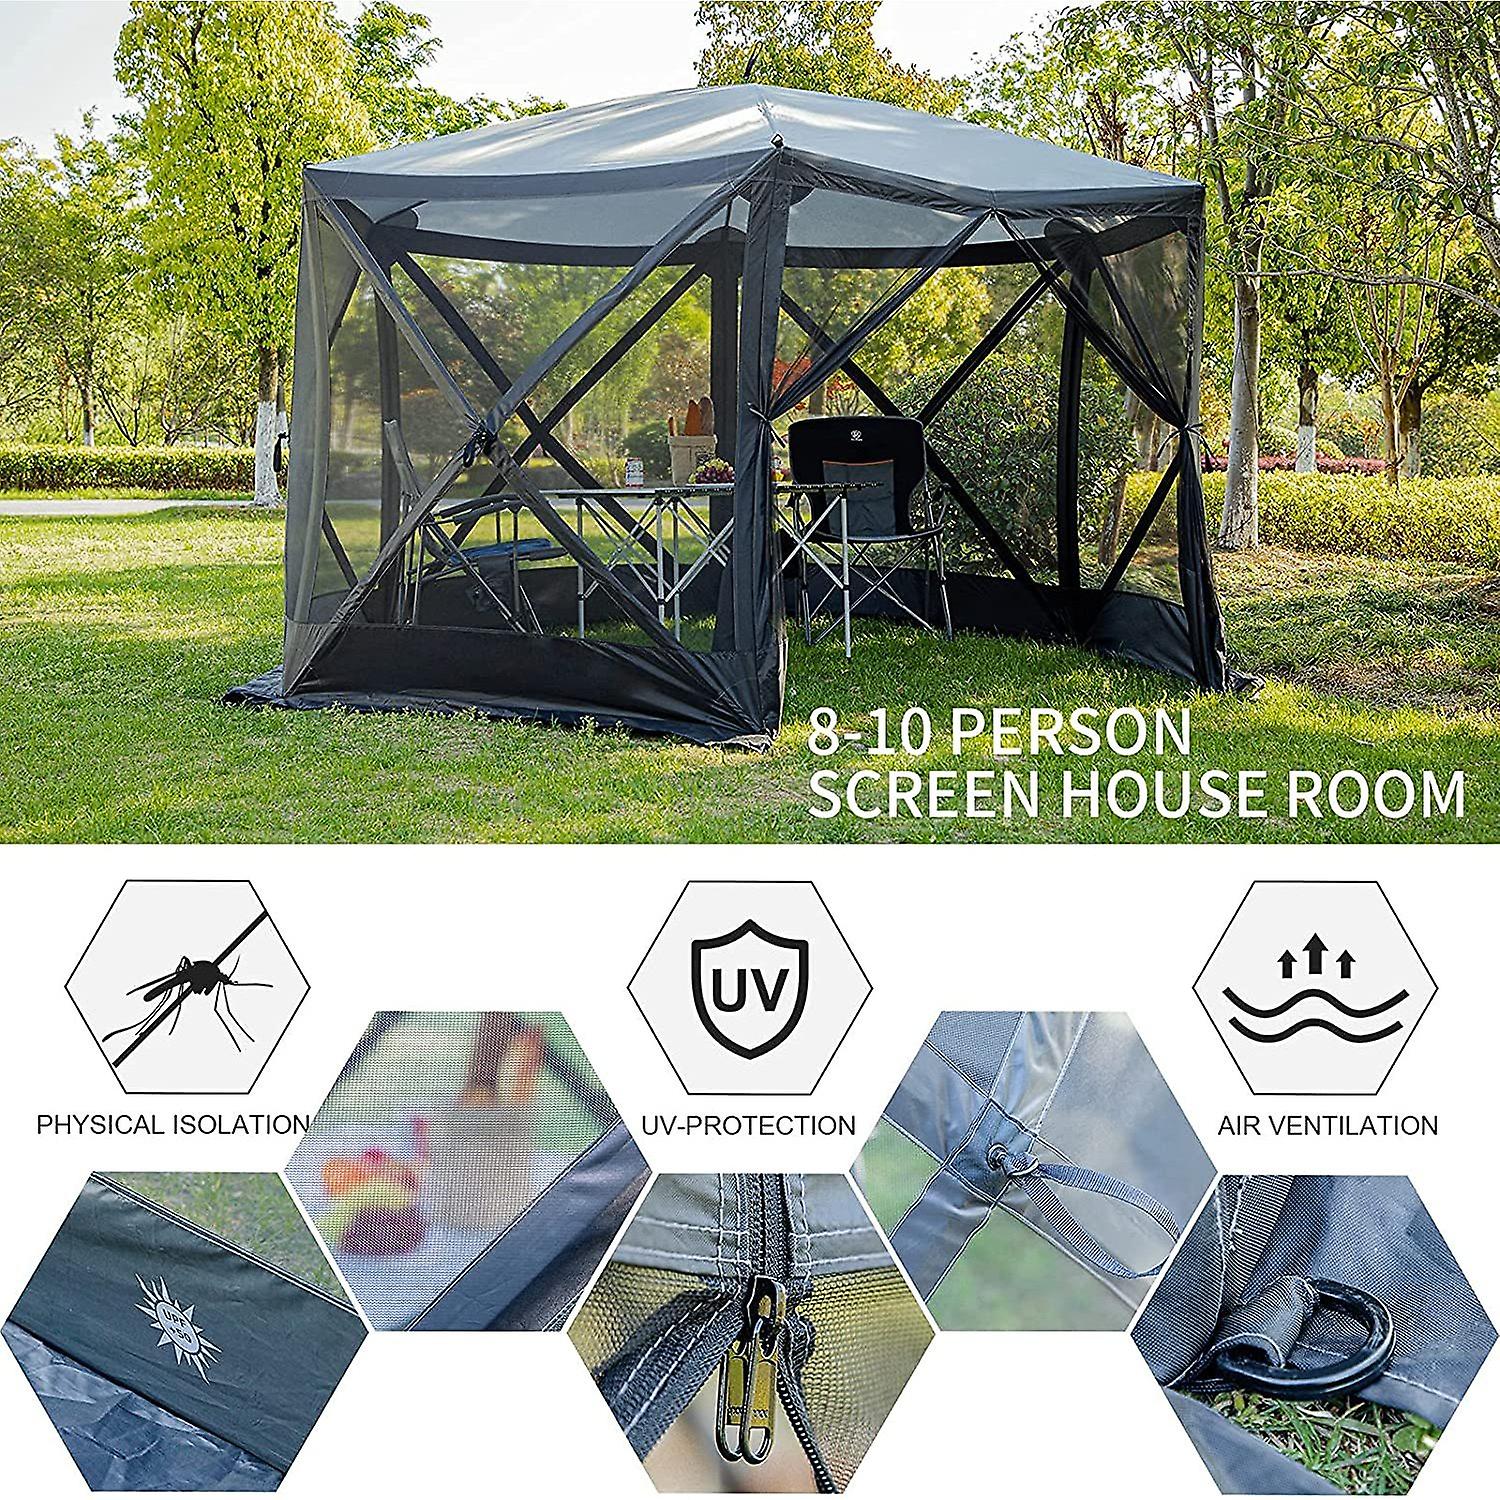 Pop Up Gazebo Screen House Tent For Camping 11.5 Ft For 8-10 Person Instant Canopy Shelter With Netting Portable For Outdoor， Backyard